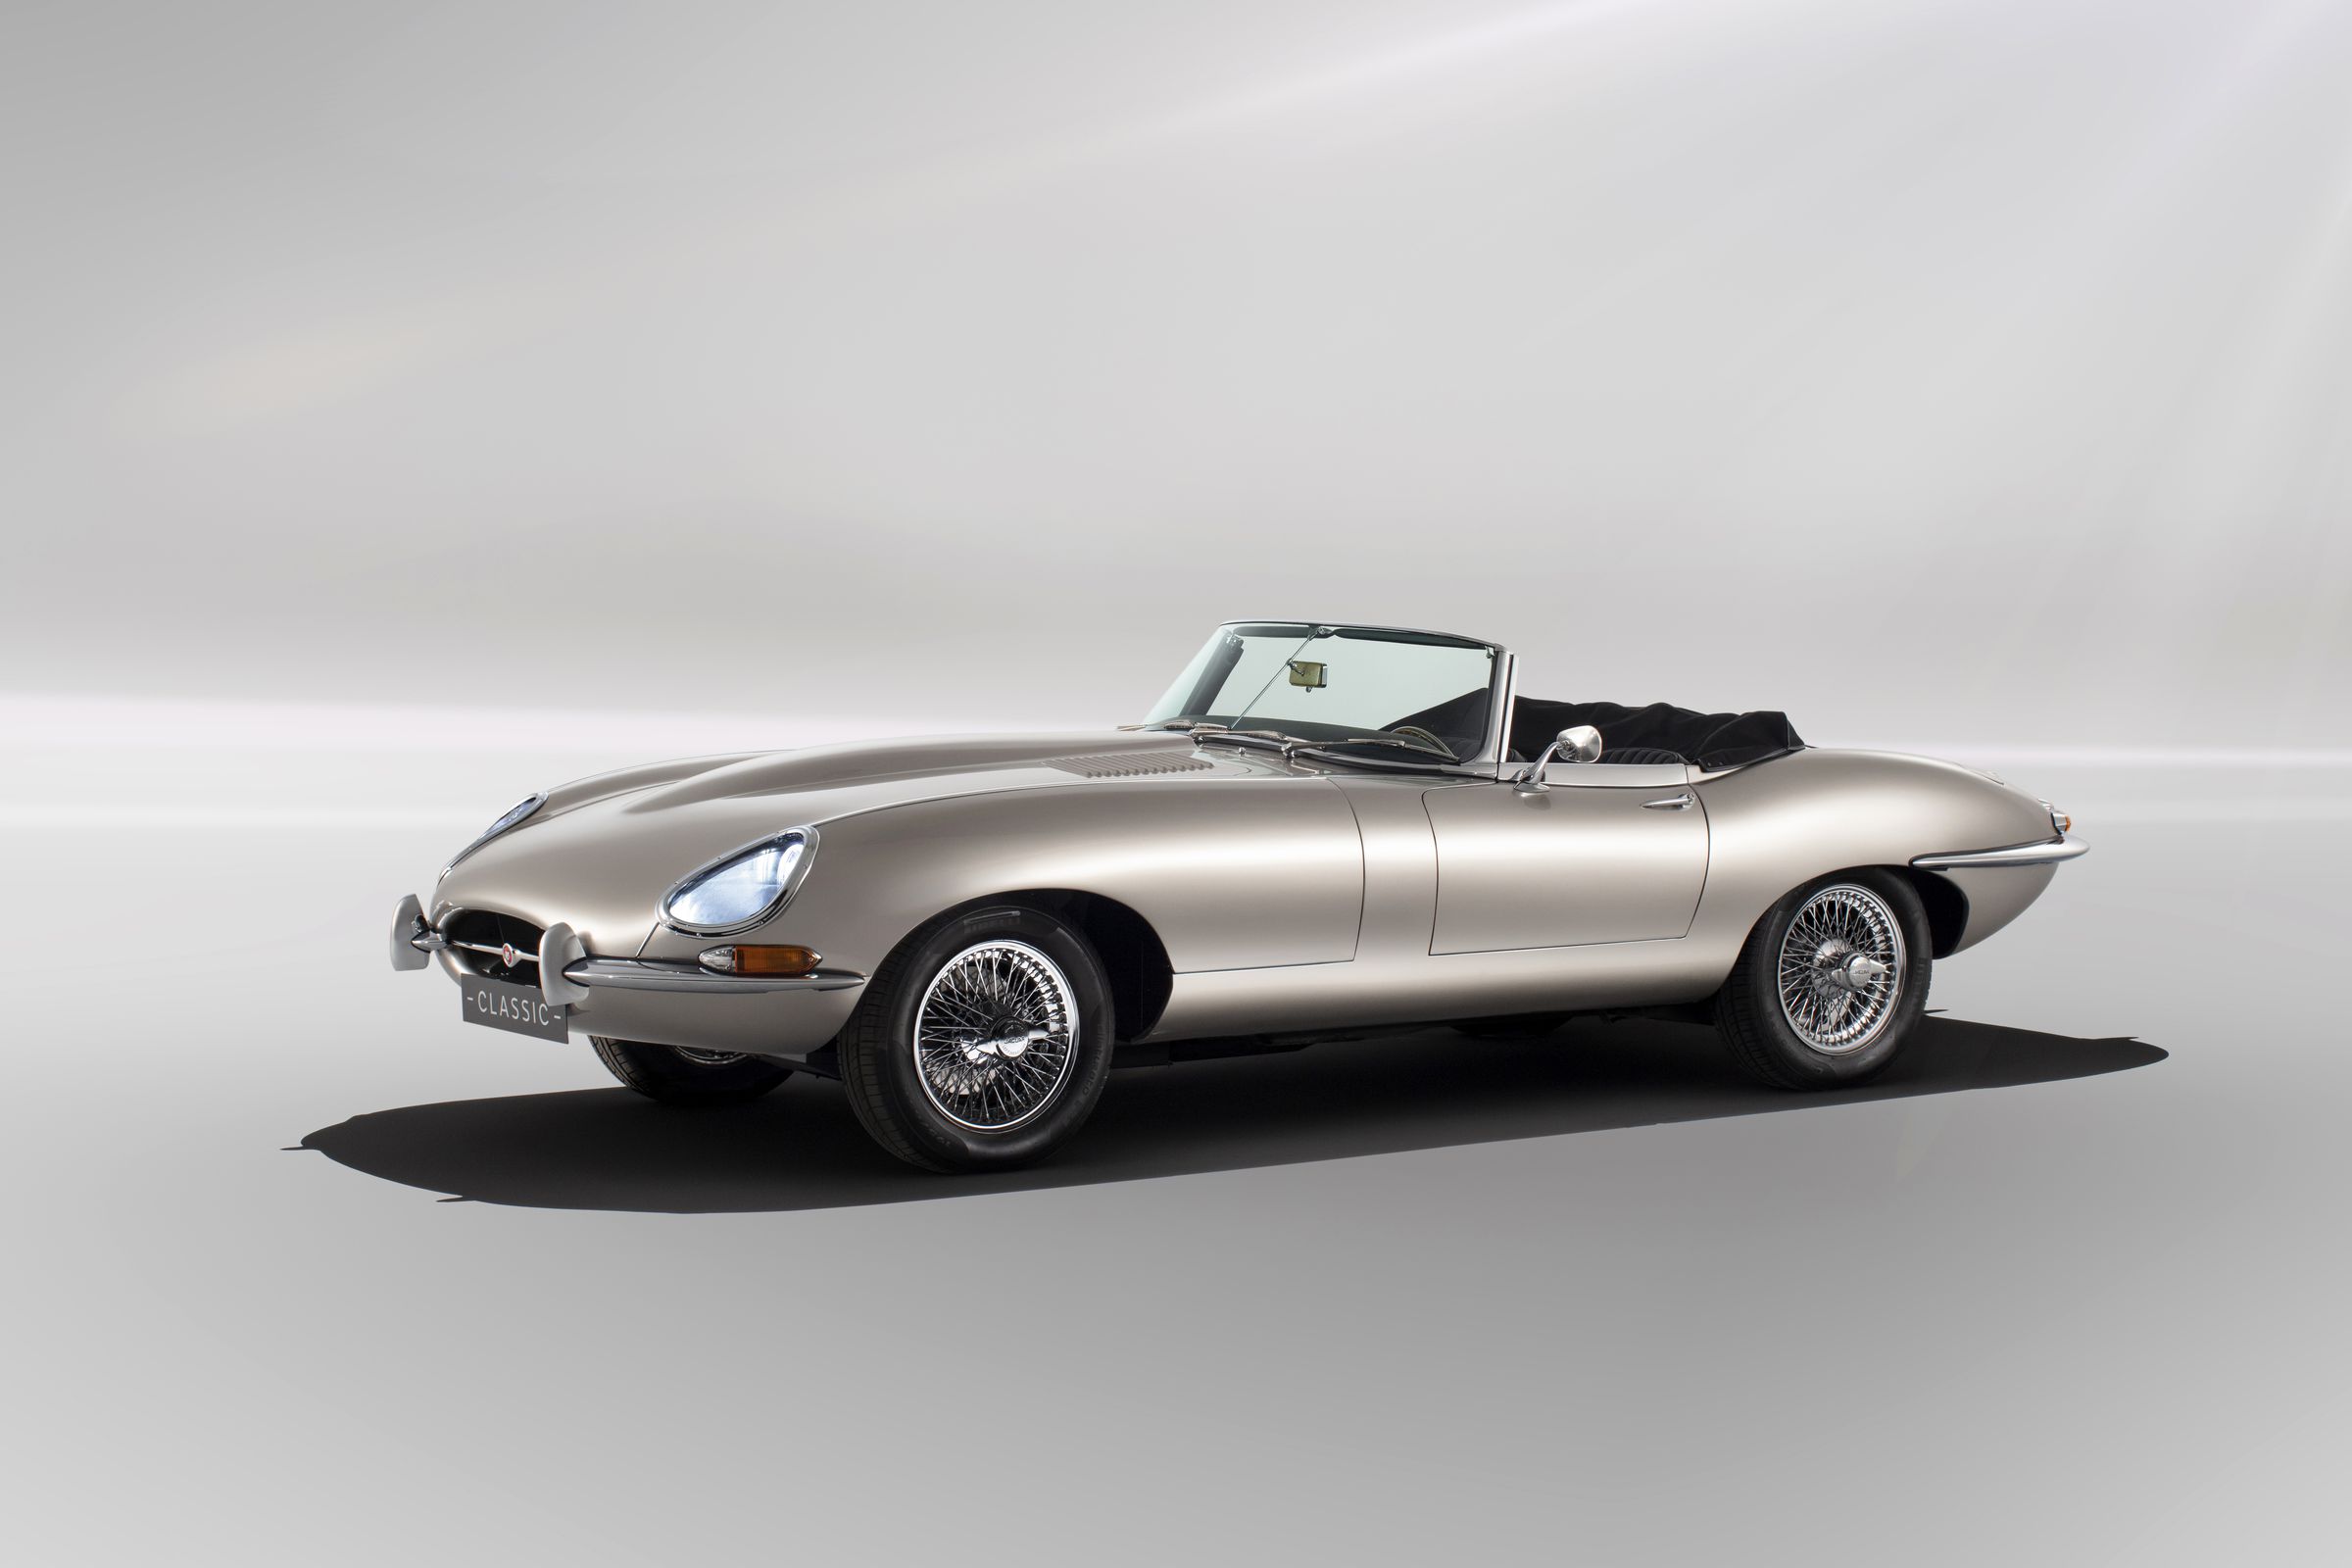 Jaguar will sell a limited-run, all-electric version of the E-Type from the 1960s.